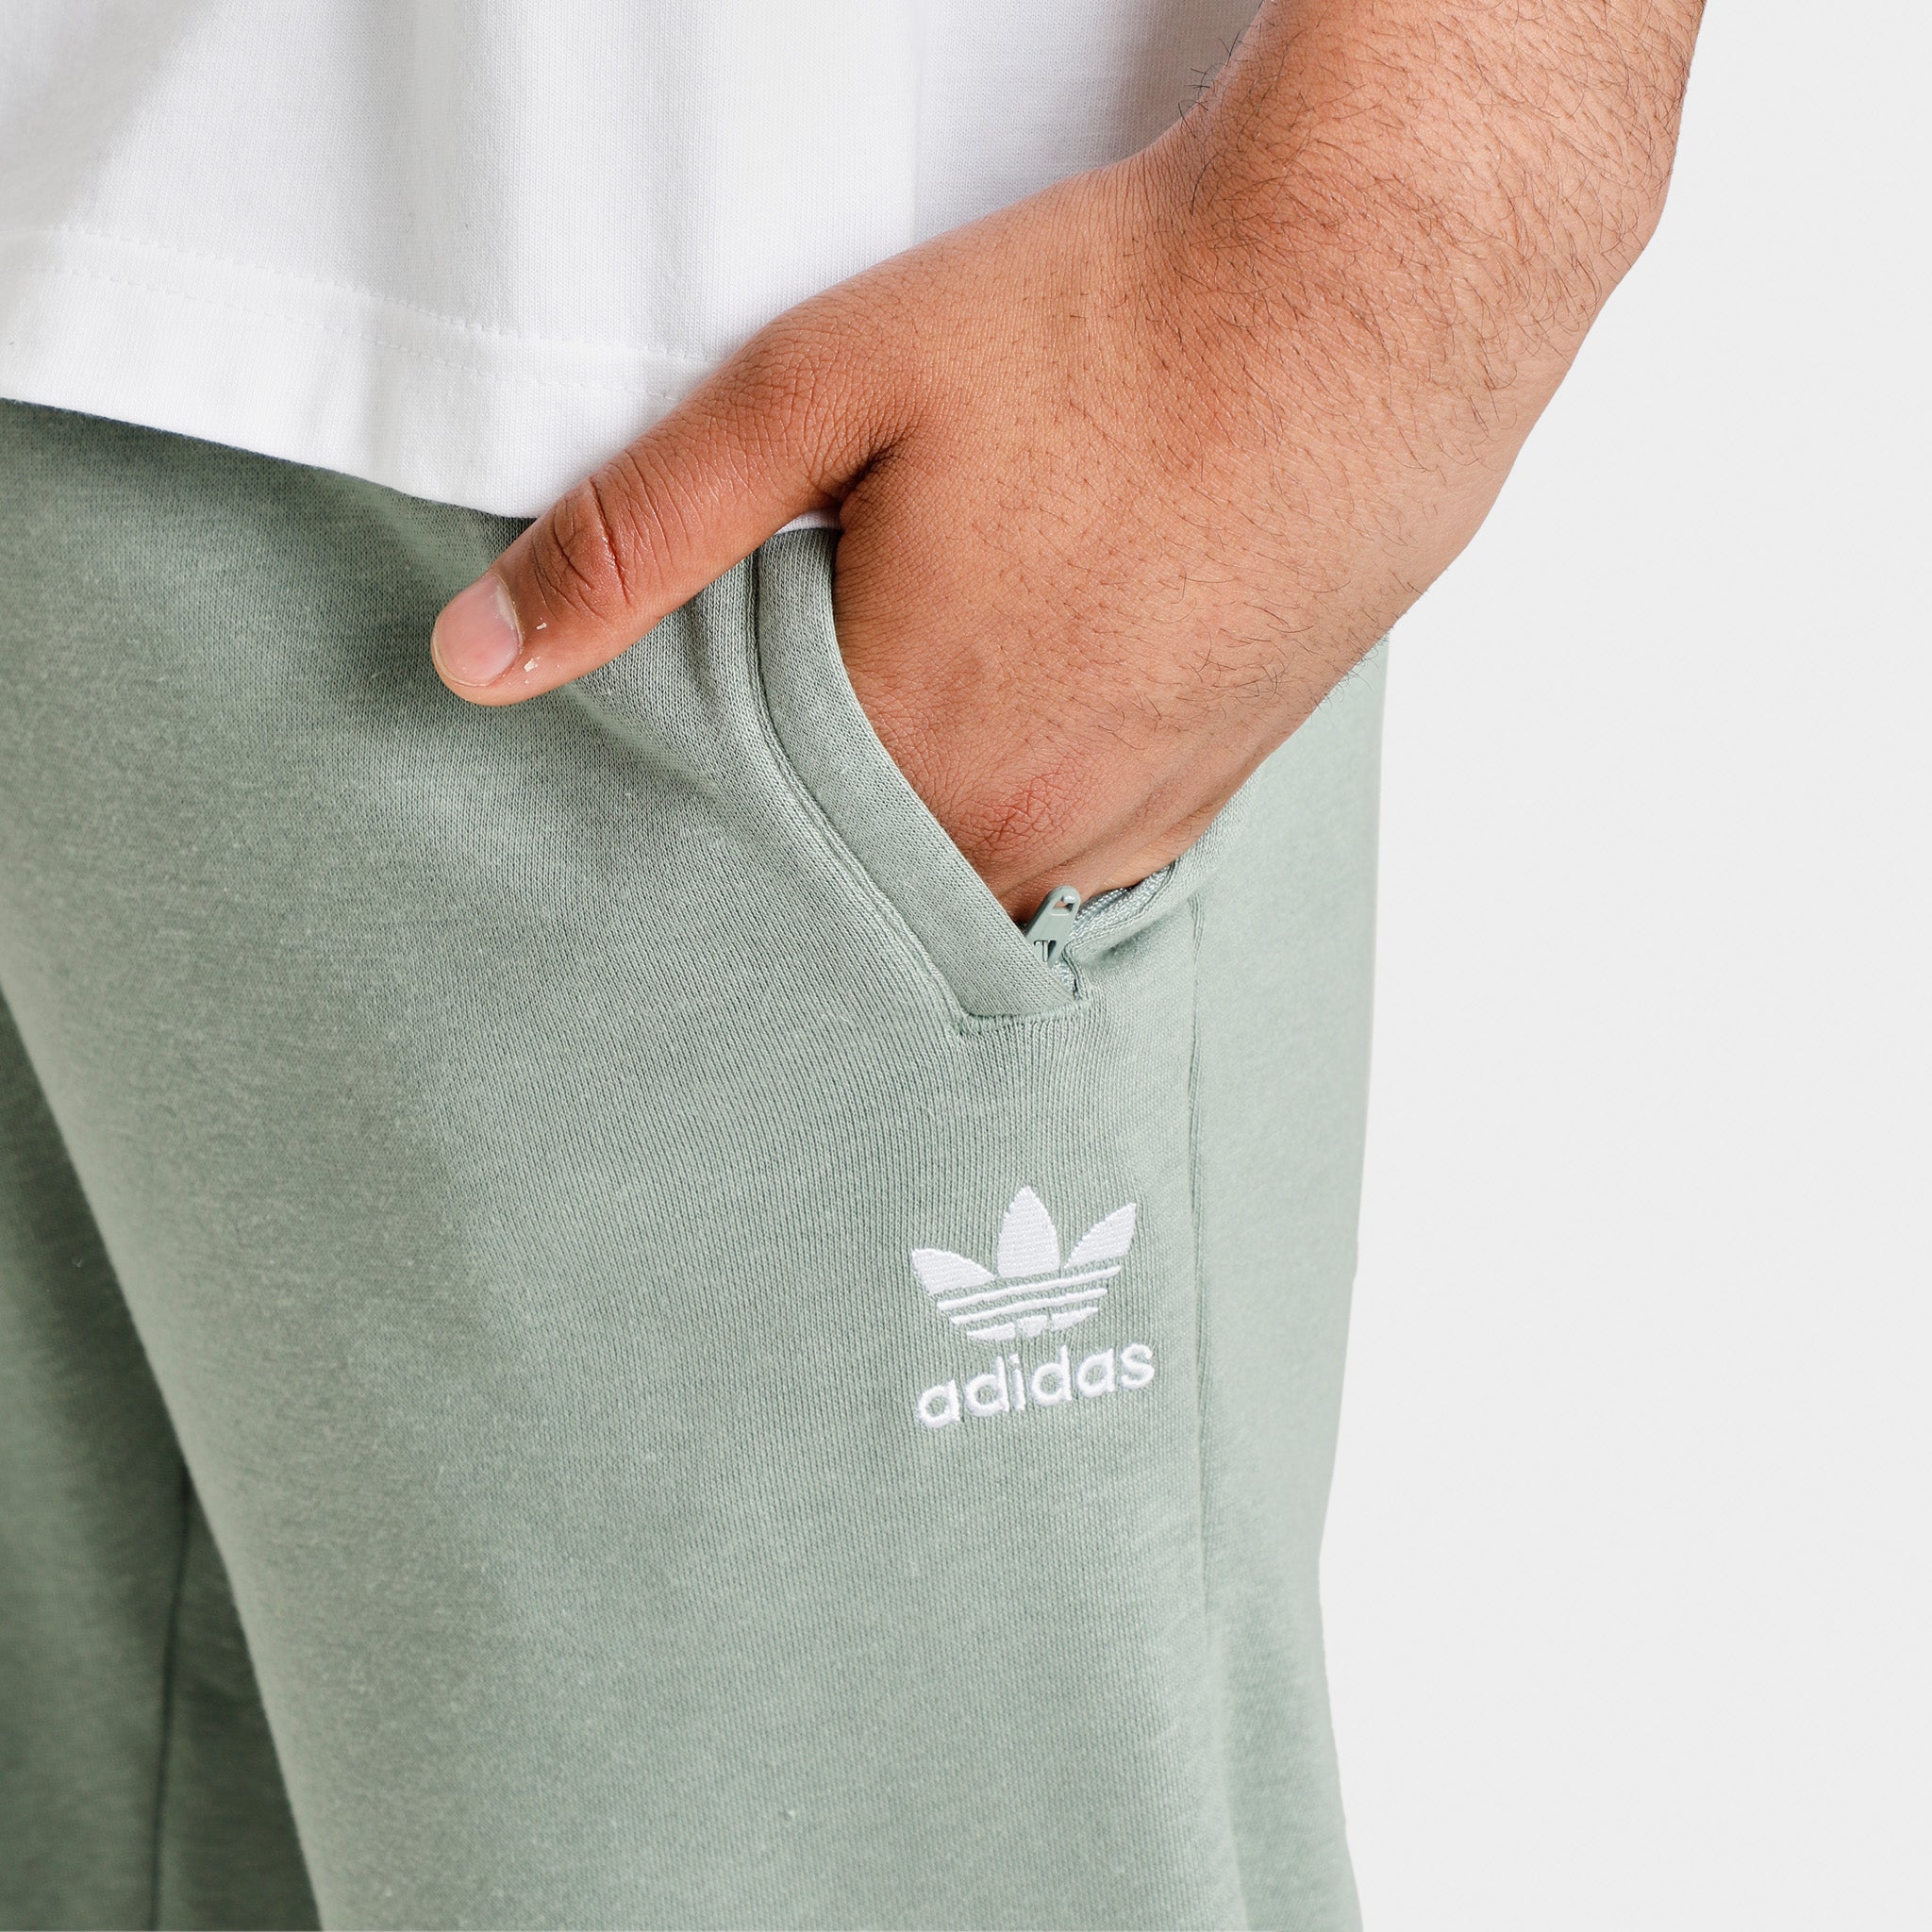 Only 42.00 usd for adidas Originals Essentials+ Made with Hemp Pants / Silver  Green Online at the Shop